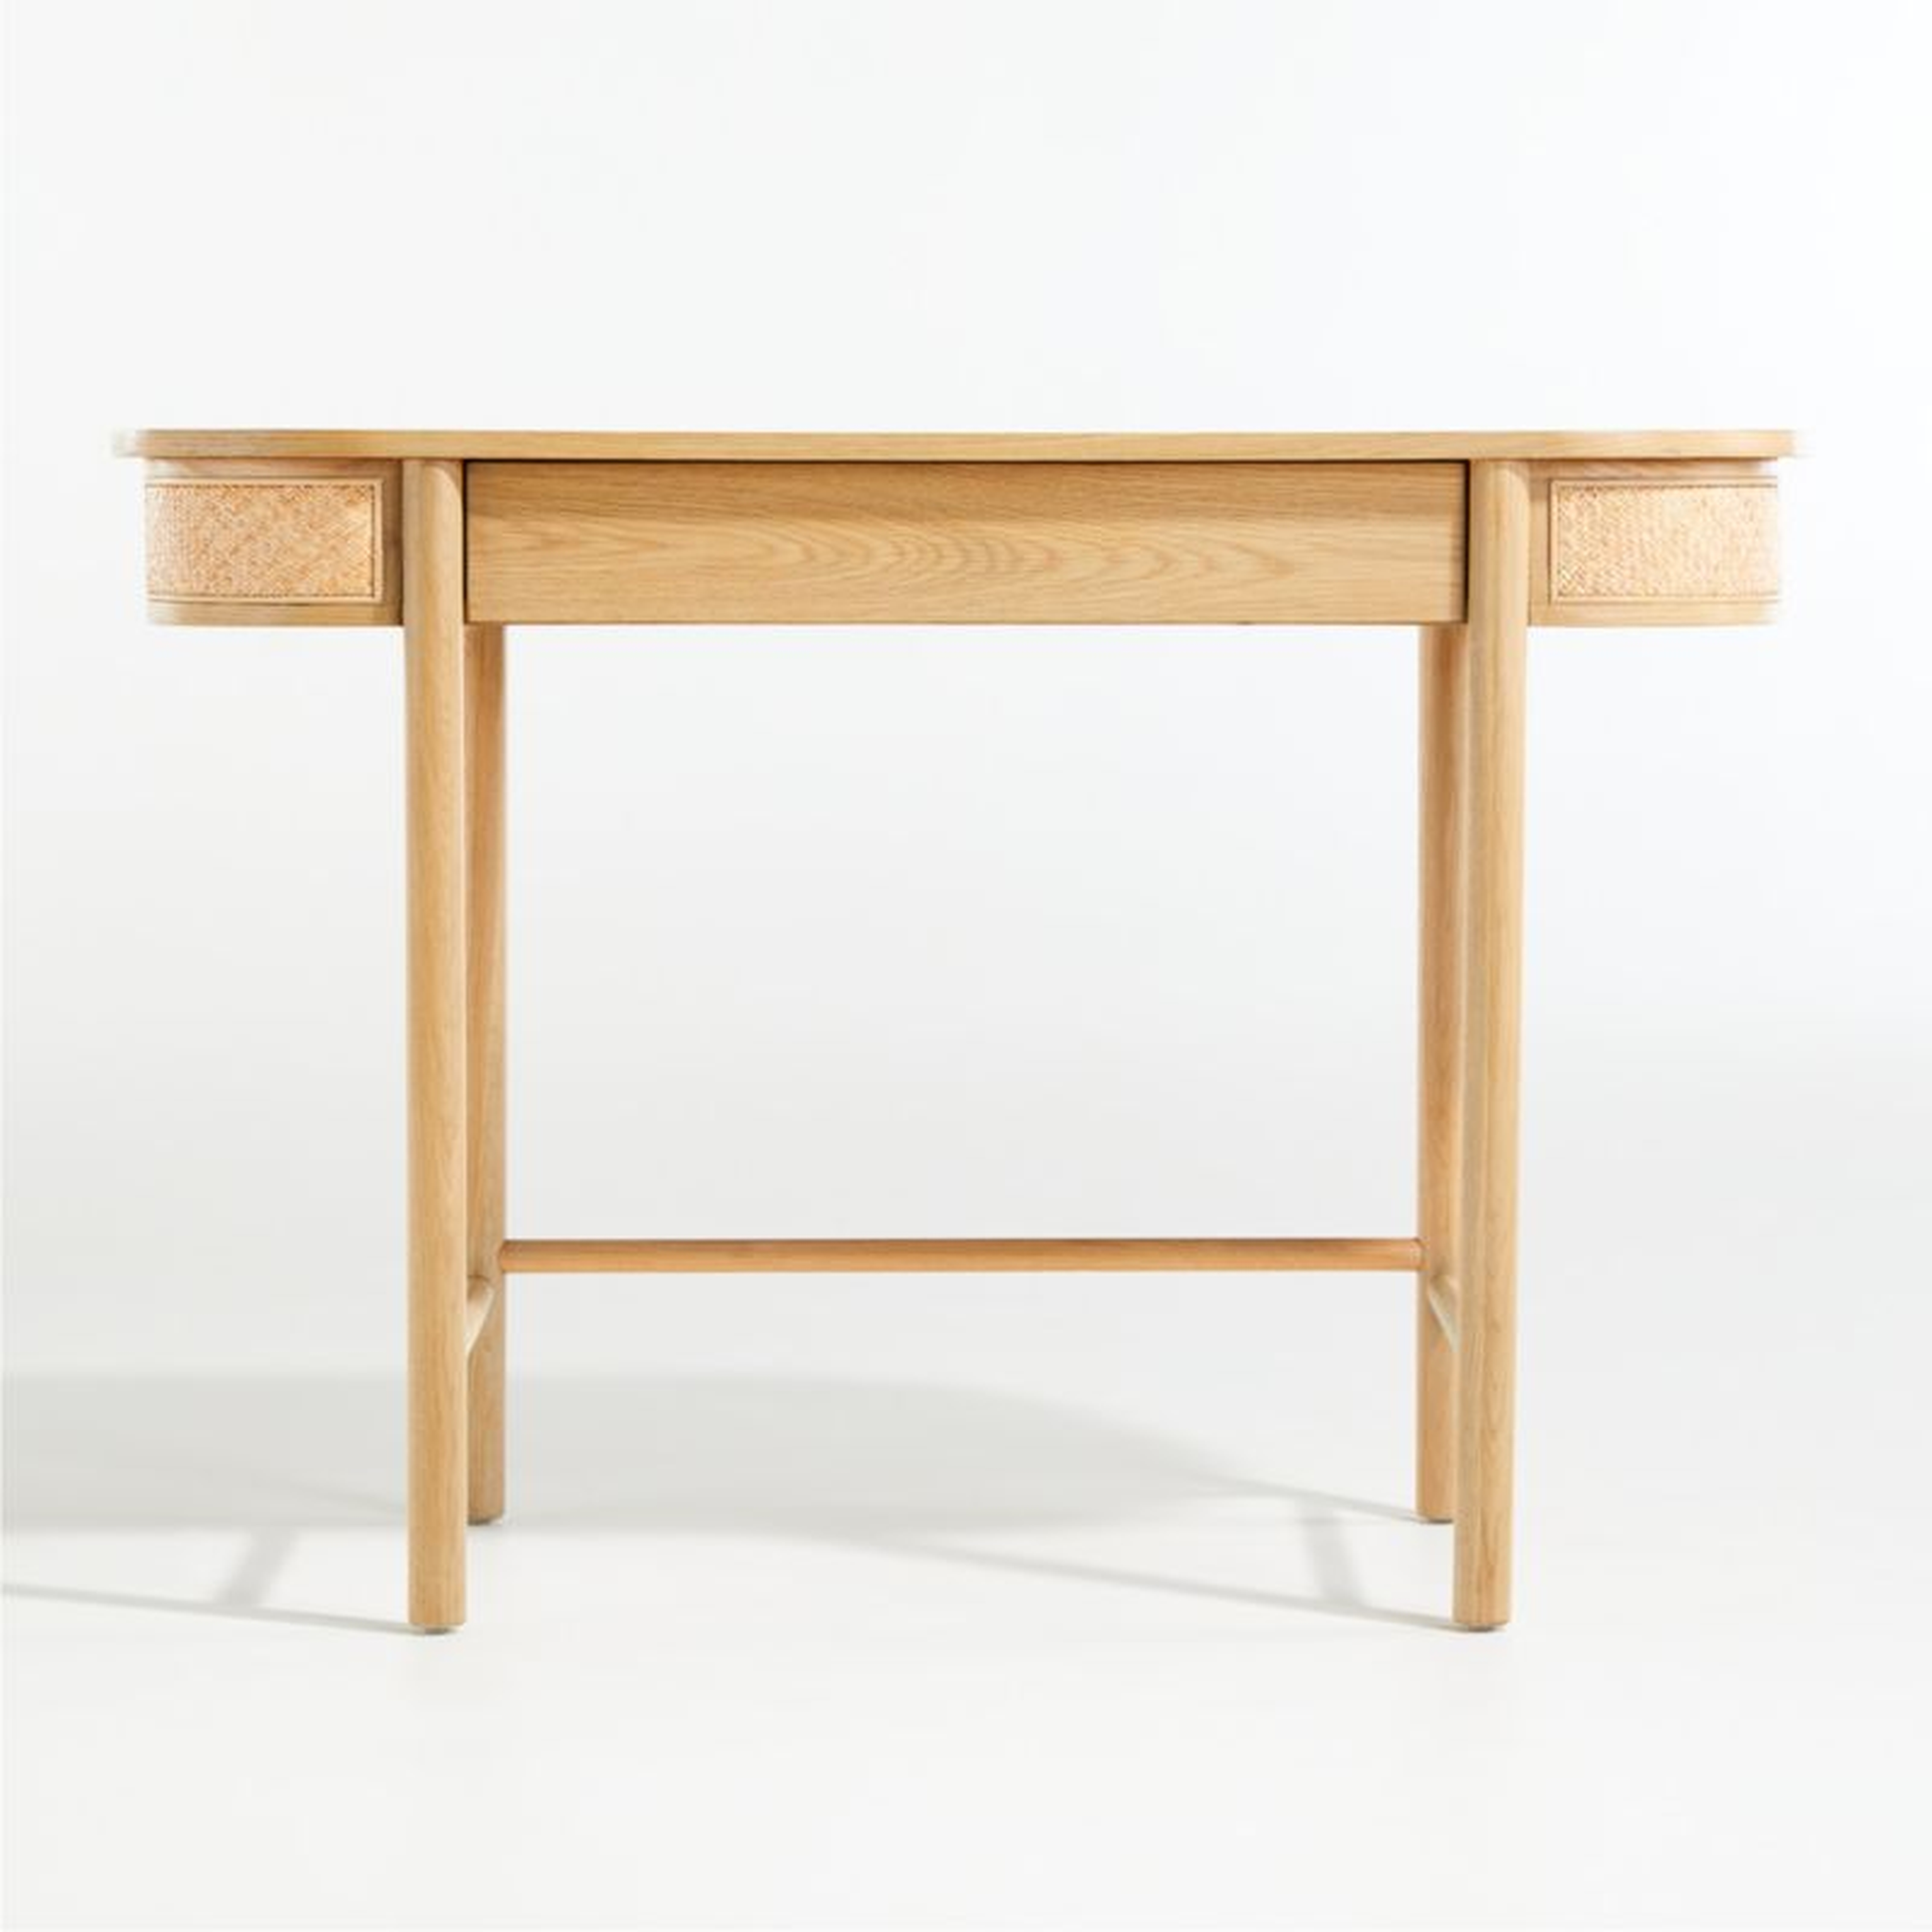 Canyon Natural Wood Kids Desk with Drawer by Leanne Ford - Crate and Barrel